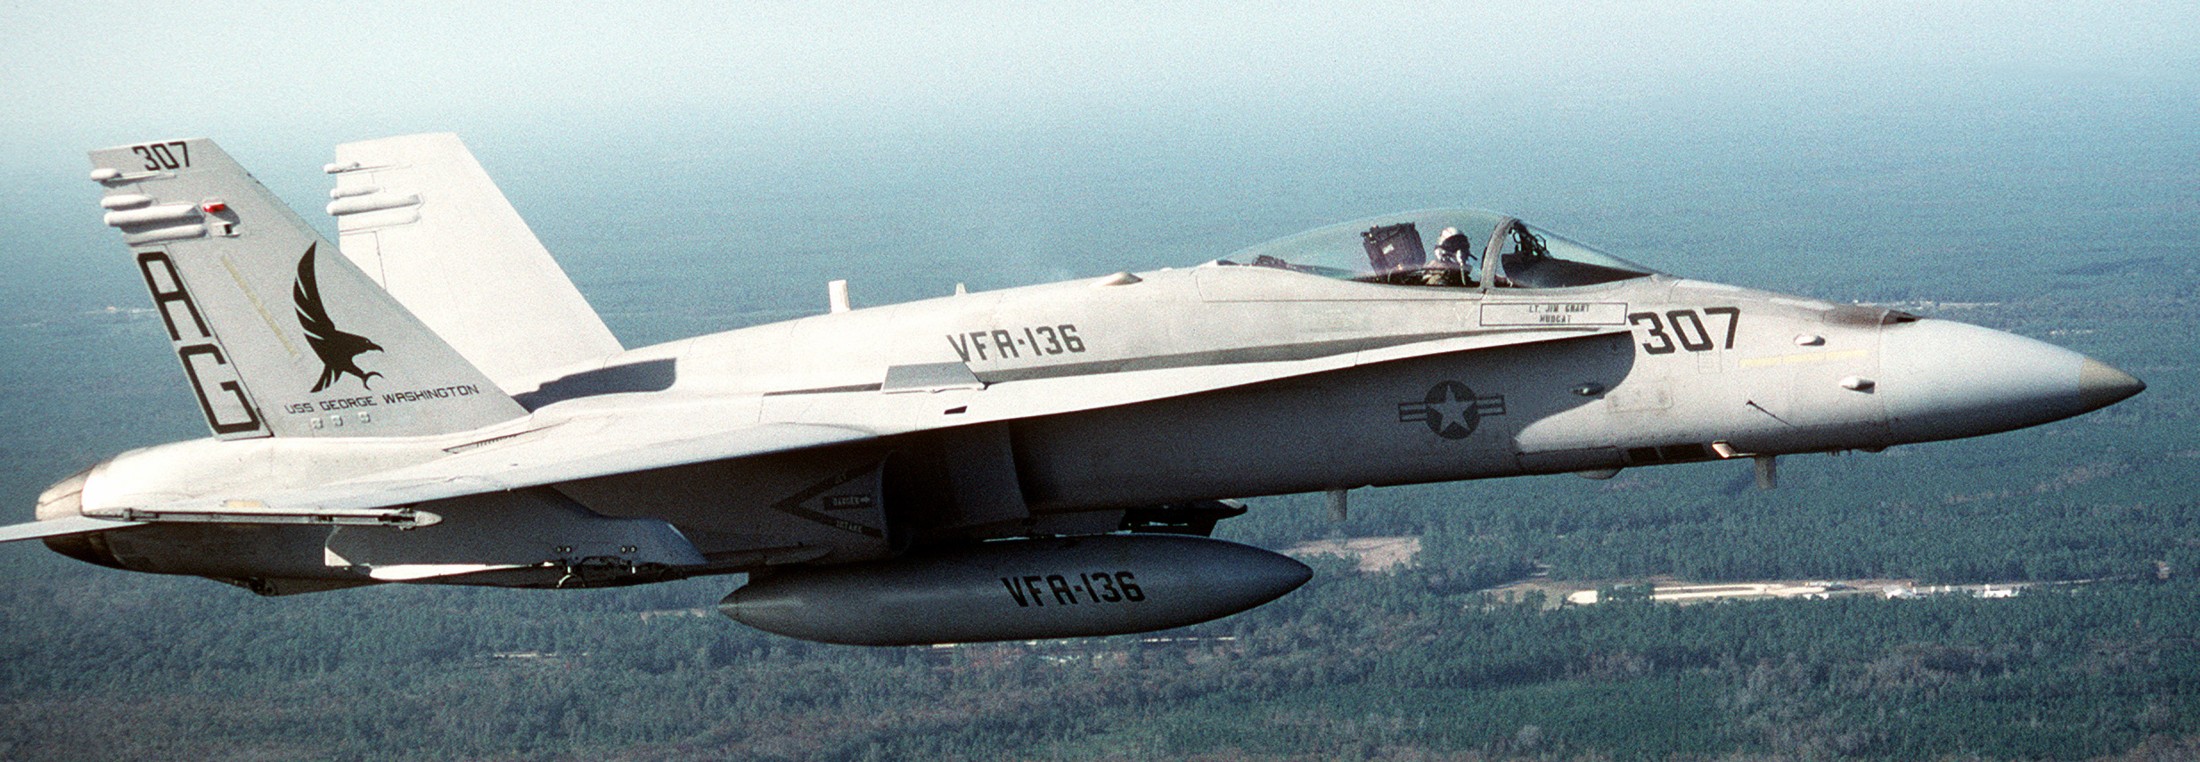 vfa-136 knighthawks strike fighter squadron f/a-18c hornet 1992 70 cvw-7 naval station roosevelt roads puerto rico